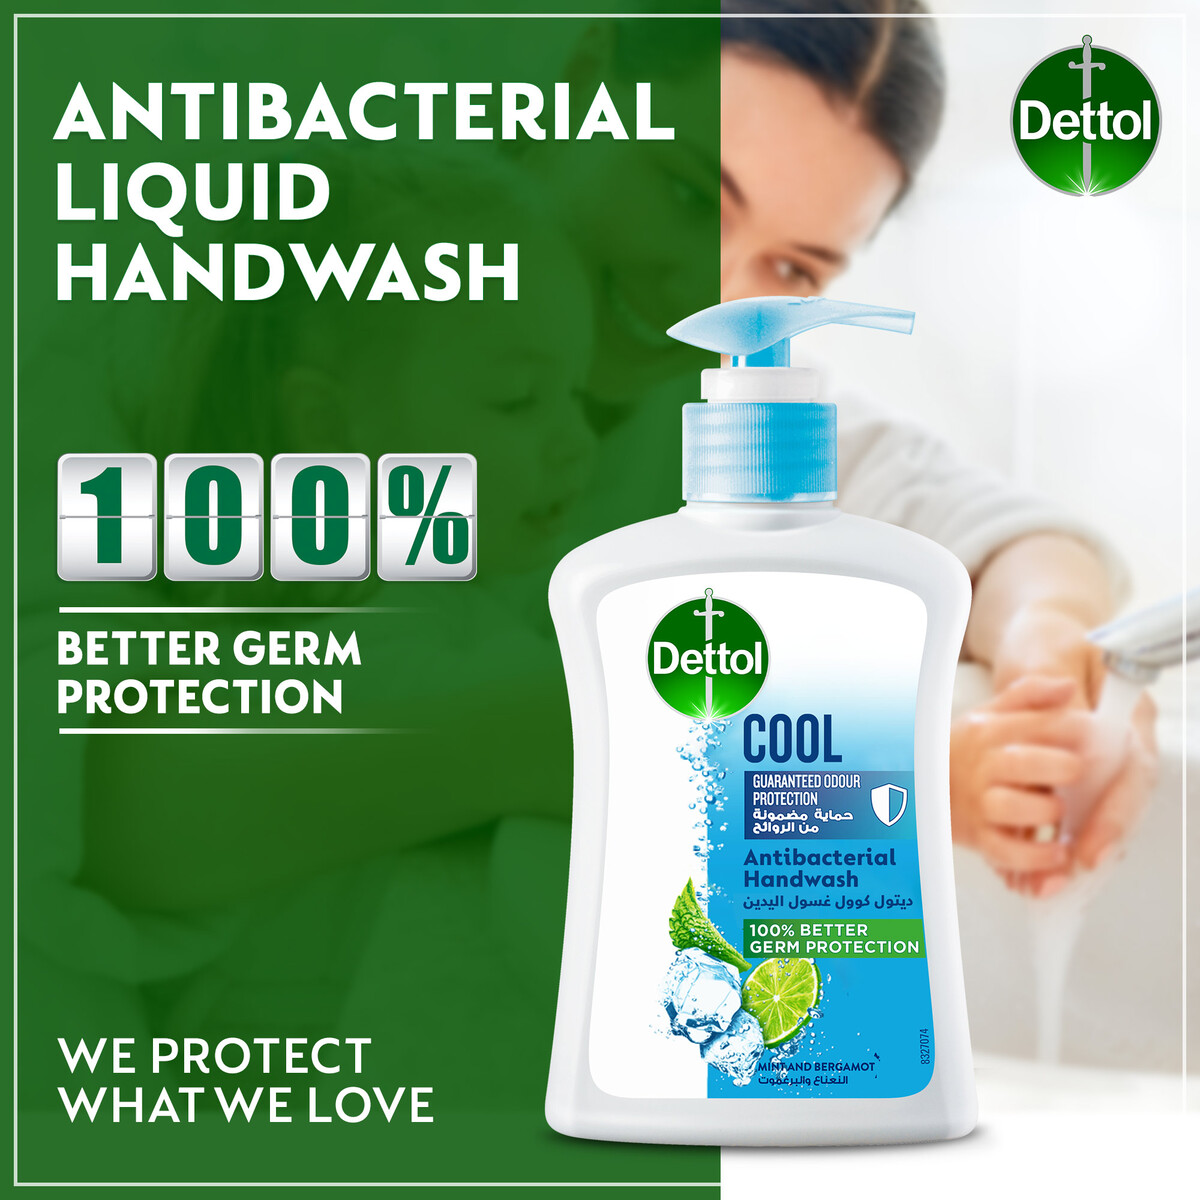 Dettol Cool Anti-Bacterial Hand Wash Value Pack 2 x 400 ml